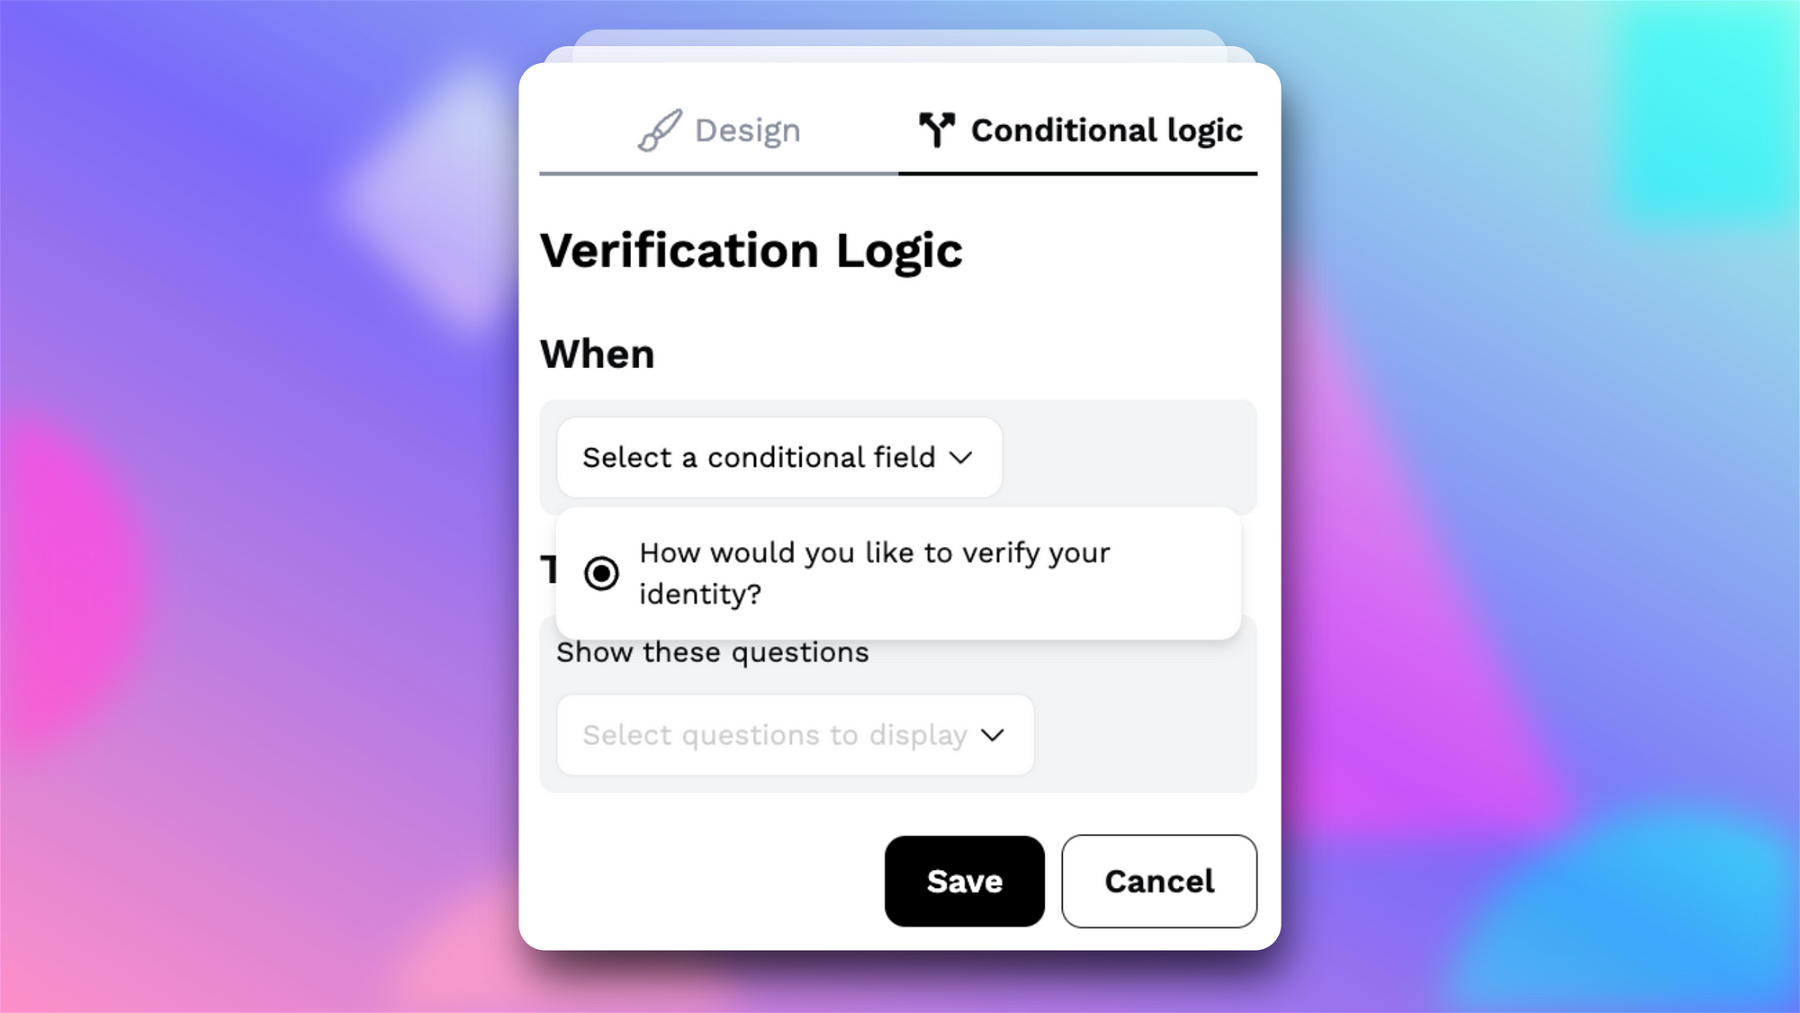 In the example screenshot, you’ll notice that “How would you like to verify your identity?” is the question that we’ll be selecting for the When field.